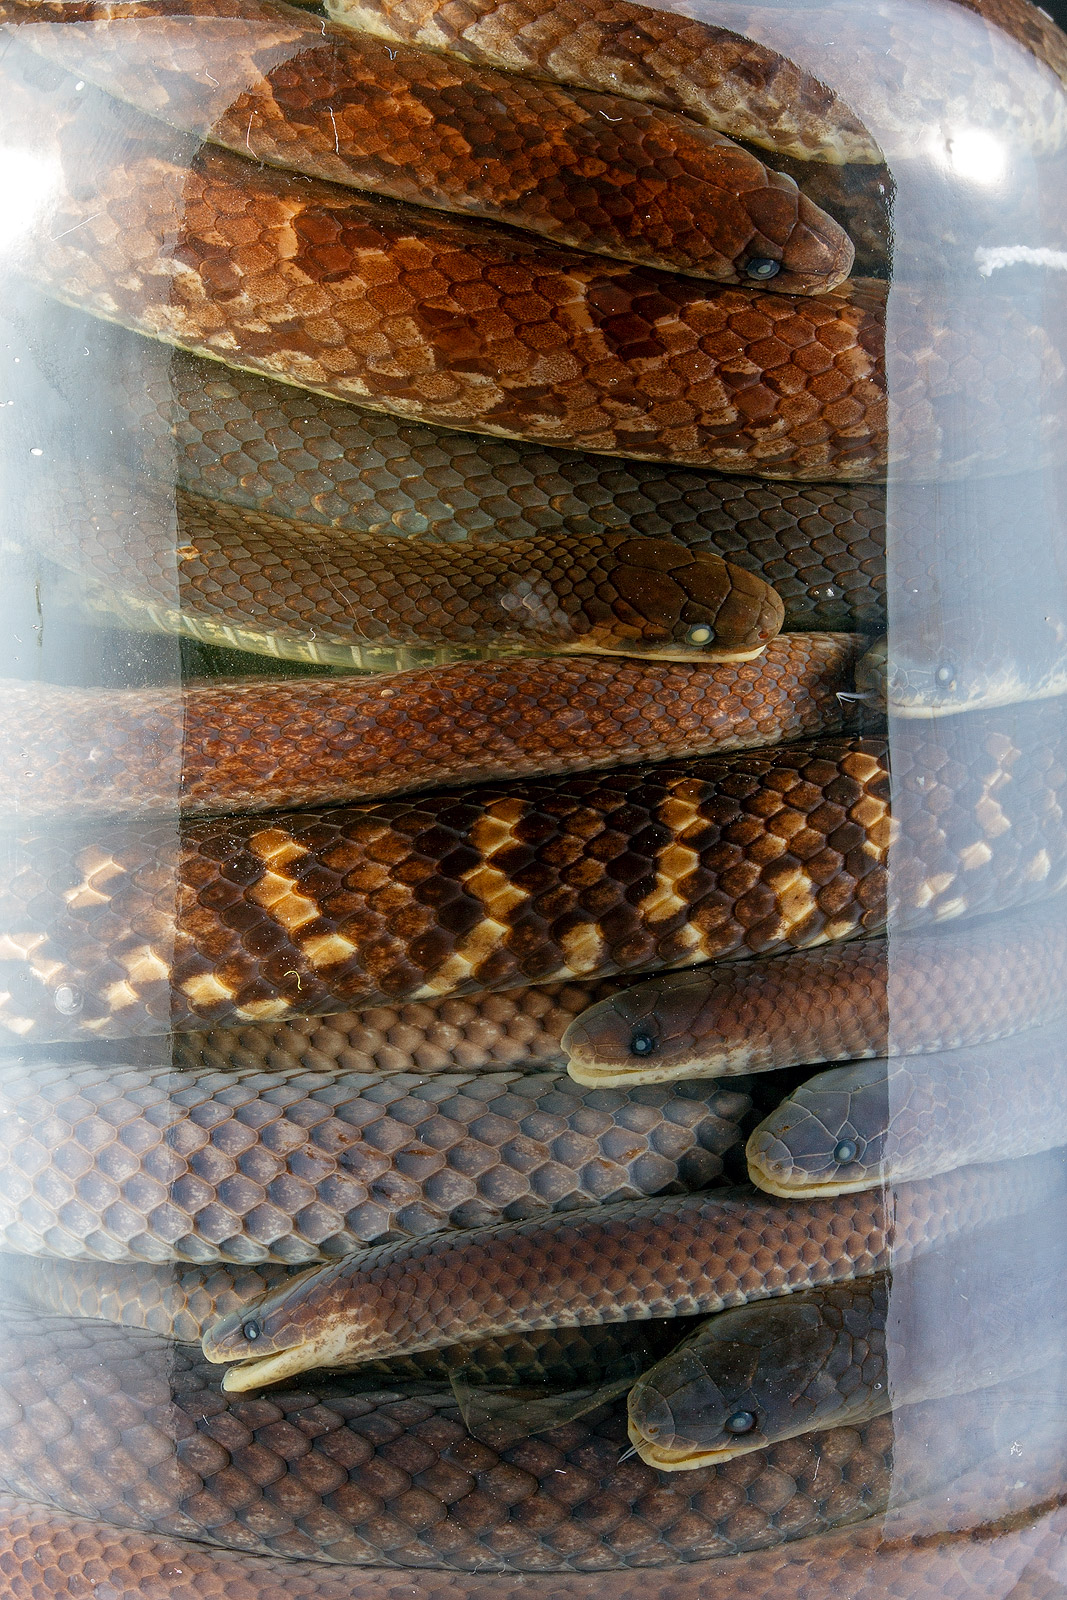 Alcohol-preserved snakes